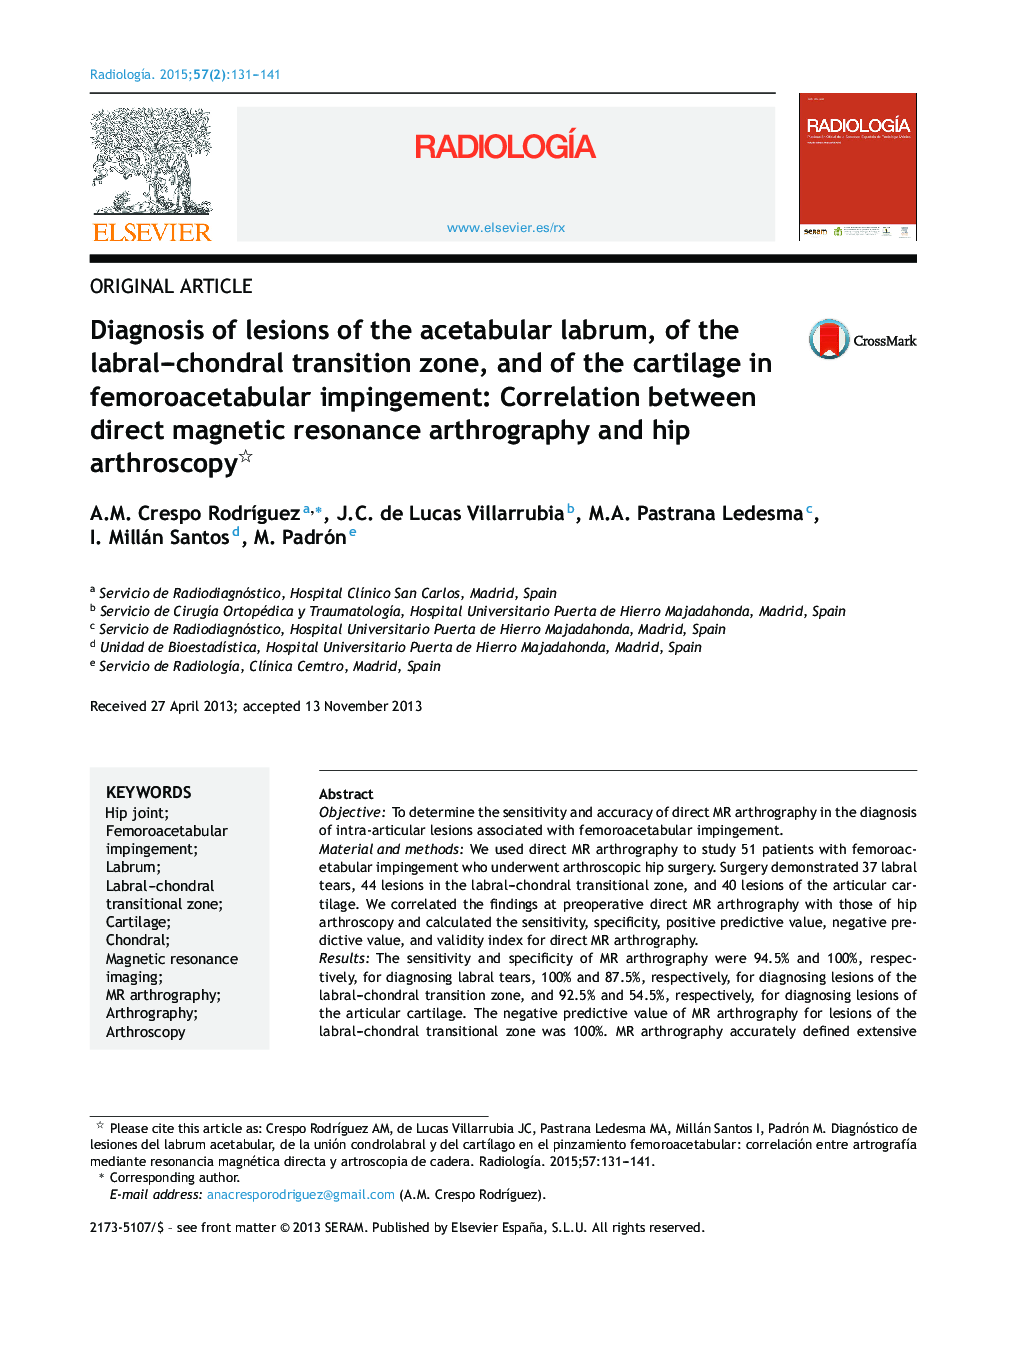 Diagnosis of lesions of the acetabular labrum, of the labral-chondral transition zone, and of the cartilage in femoroacetabular impingement: Correlation between direct magnetic resonance arthrography and hip arthroscopy